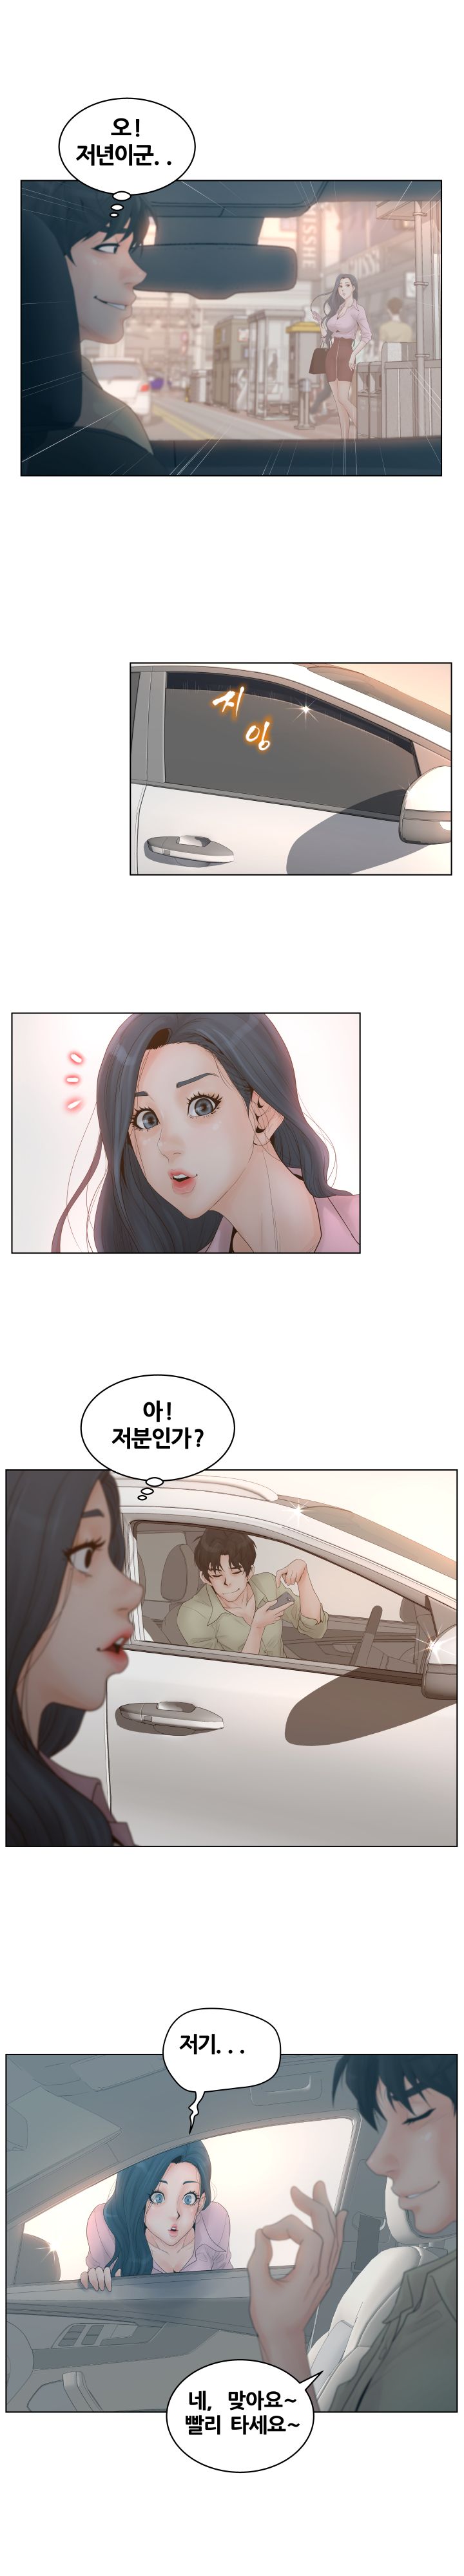 Share Girls Raw - Chapter 1 Page 9